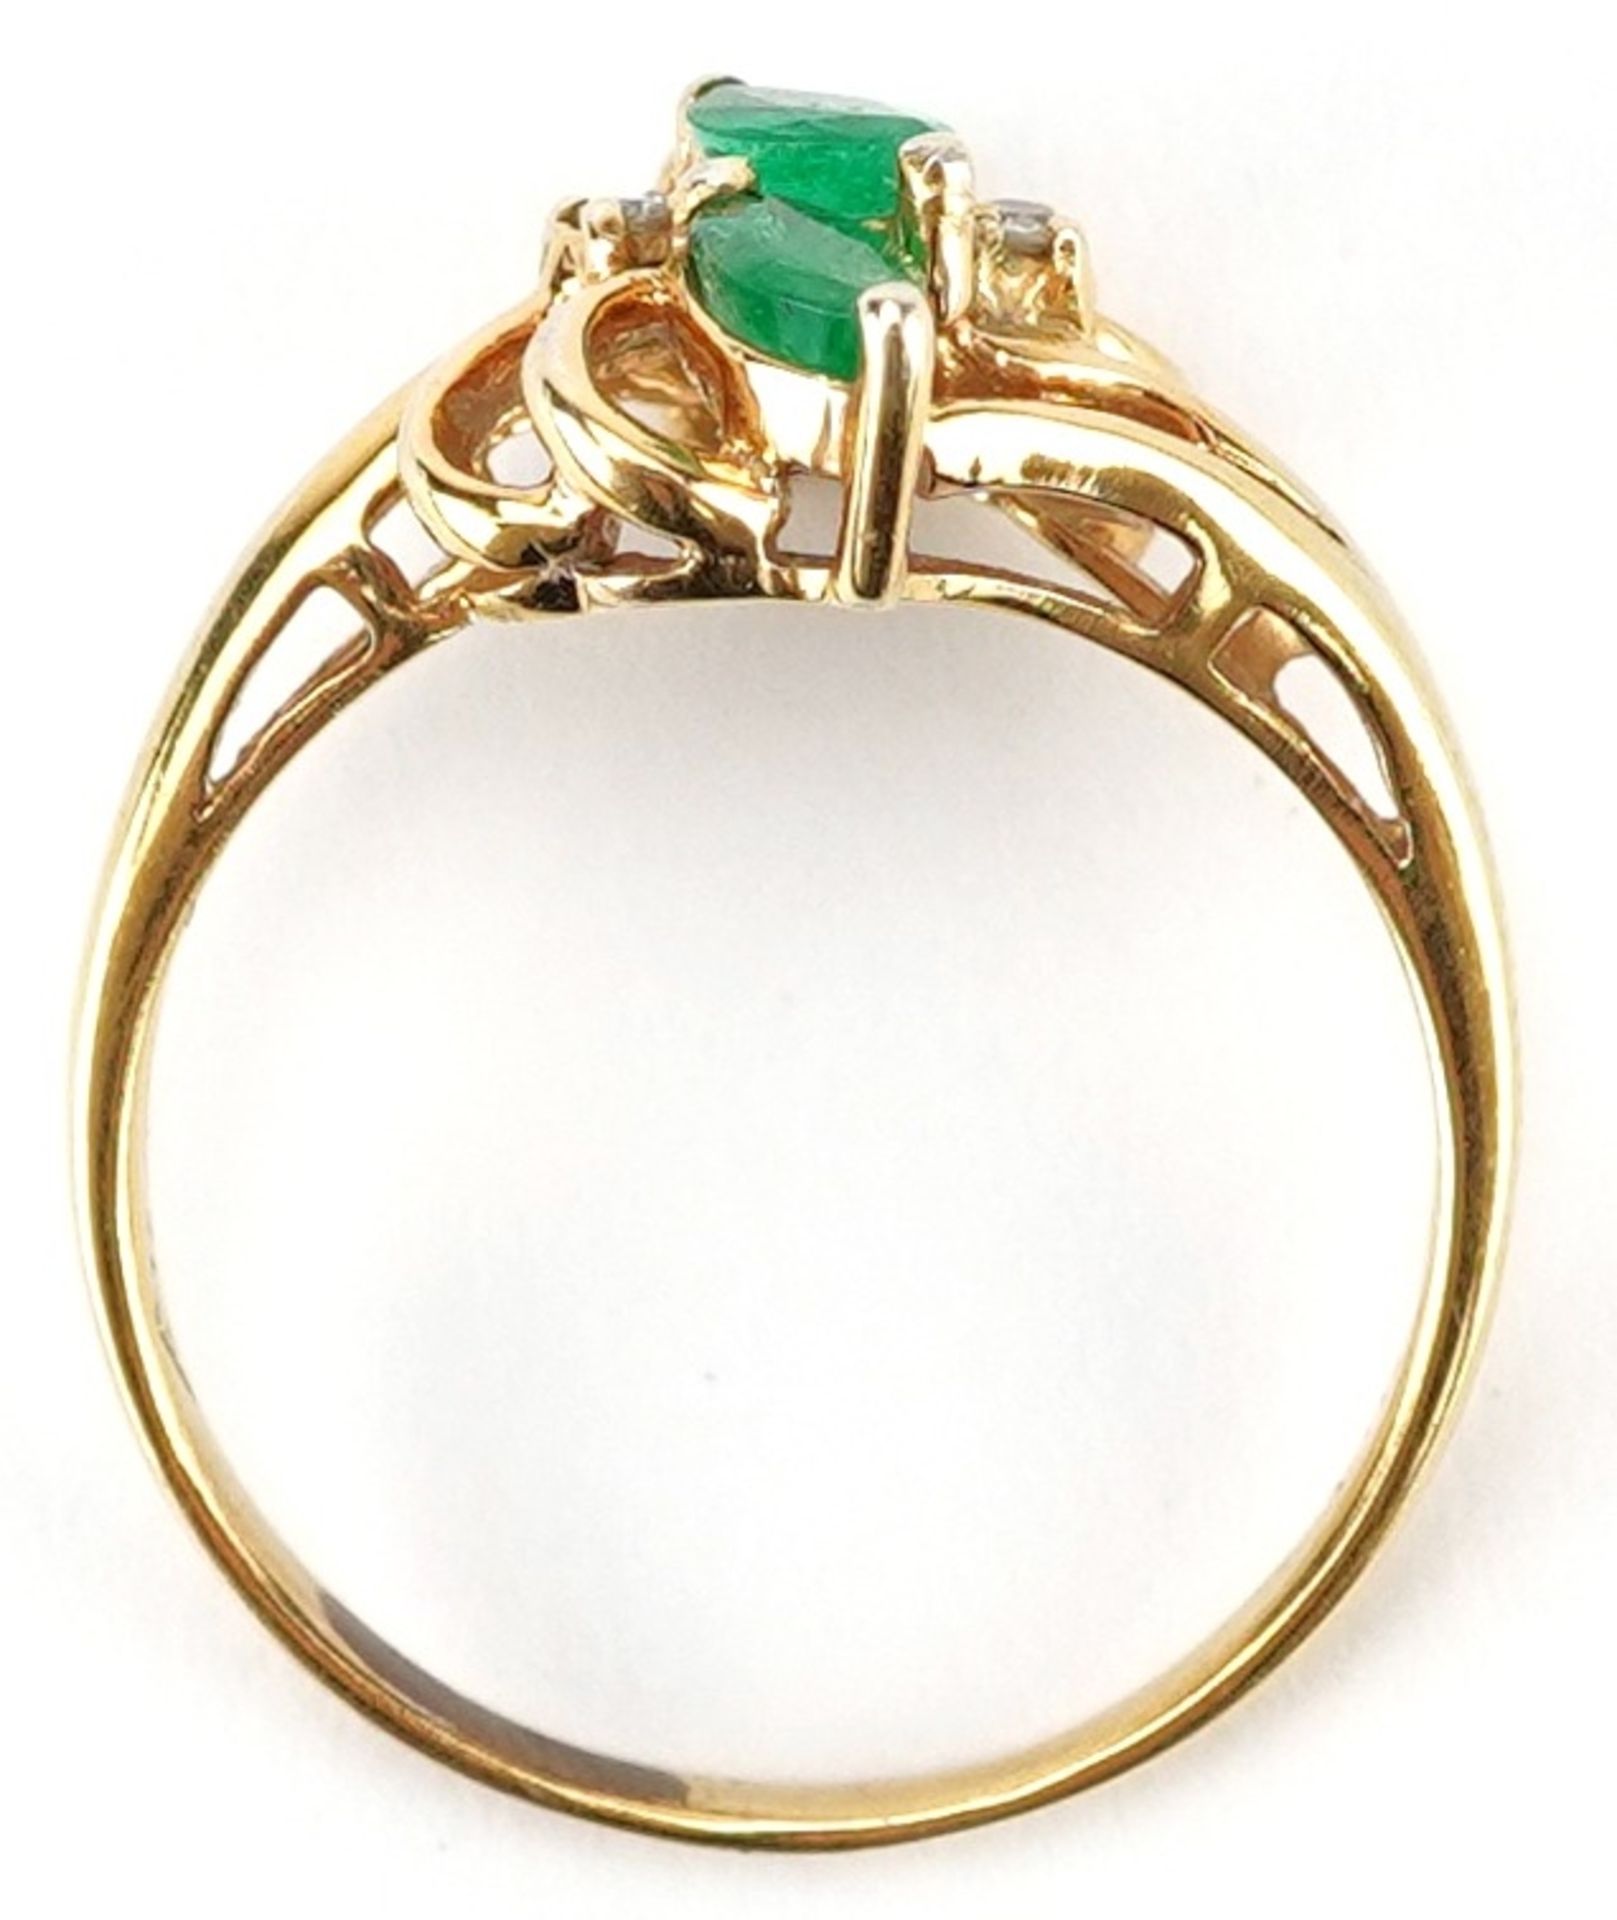 14K gold emerald and diamond naturalistic crossover ring, size L, 2.4g - Image 3 of 5